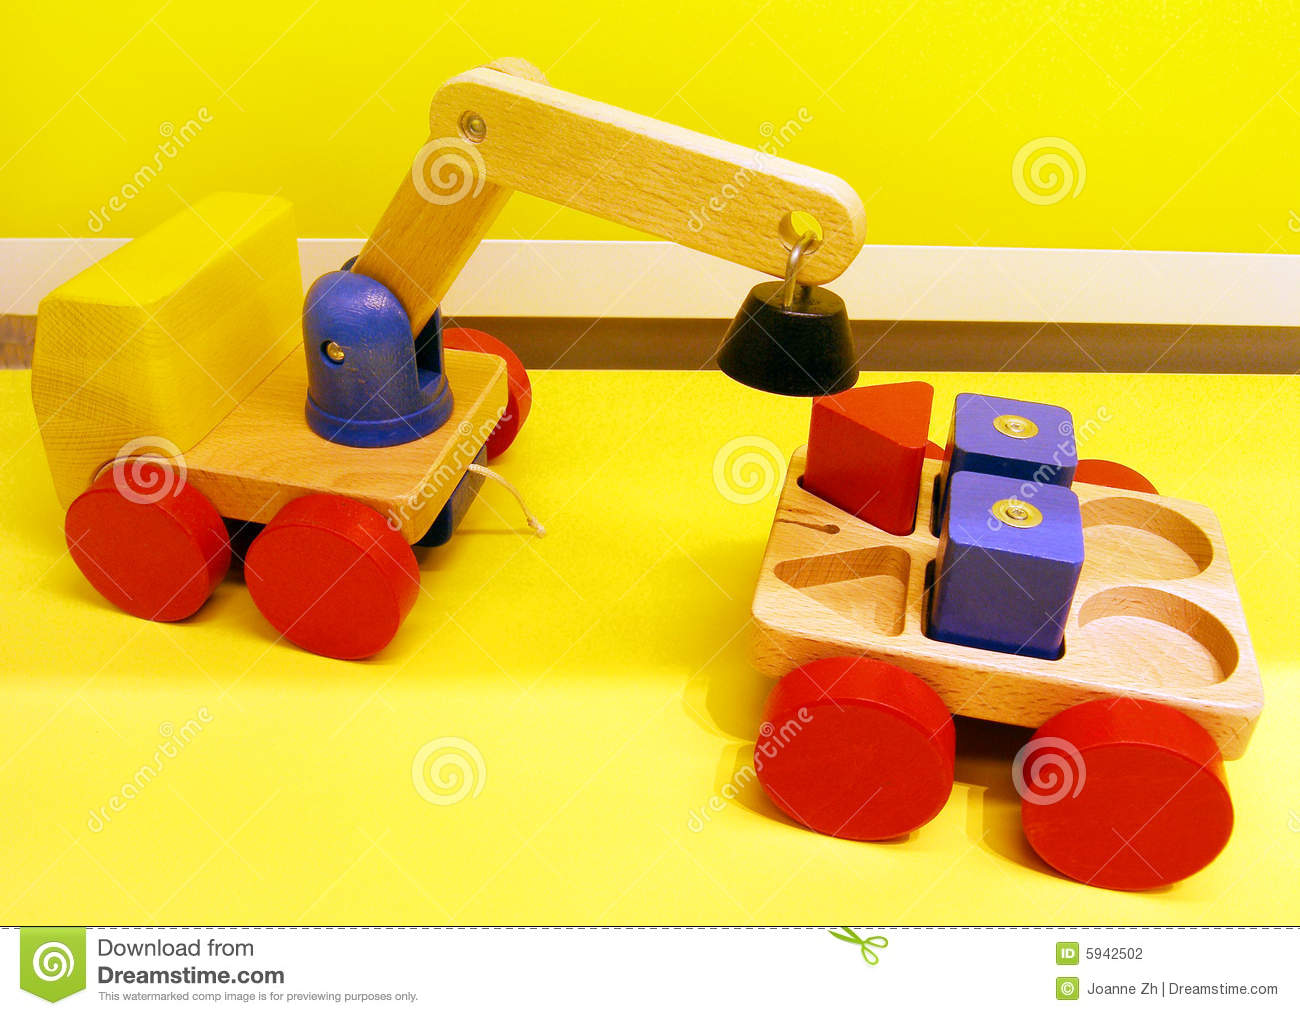 Magnetic Toy Trucks Stock Photography   Image  5942502